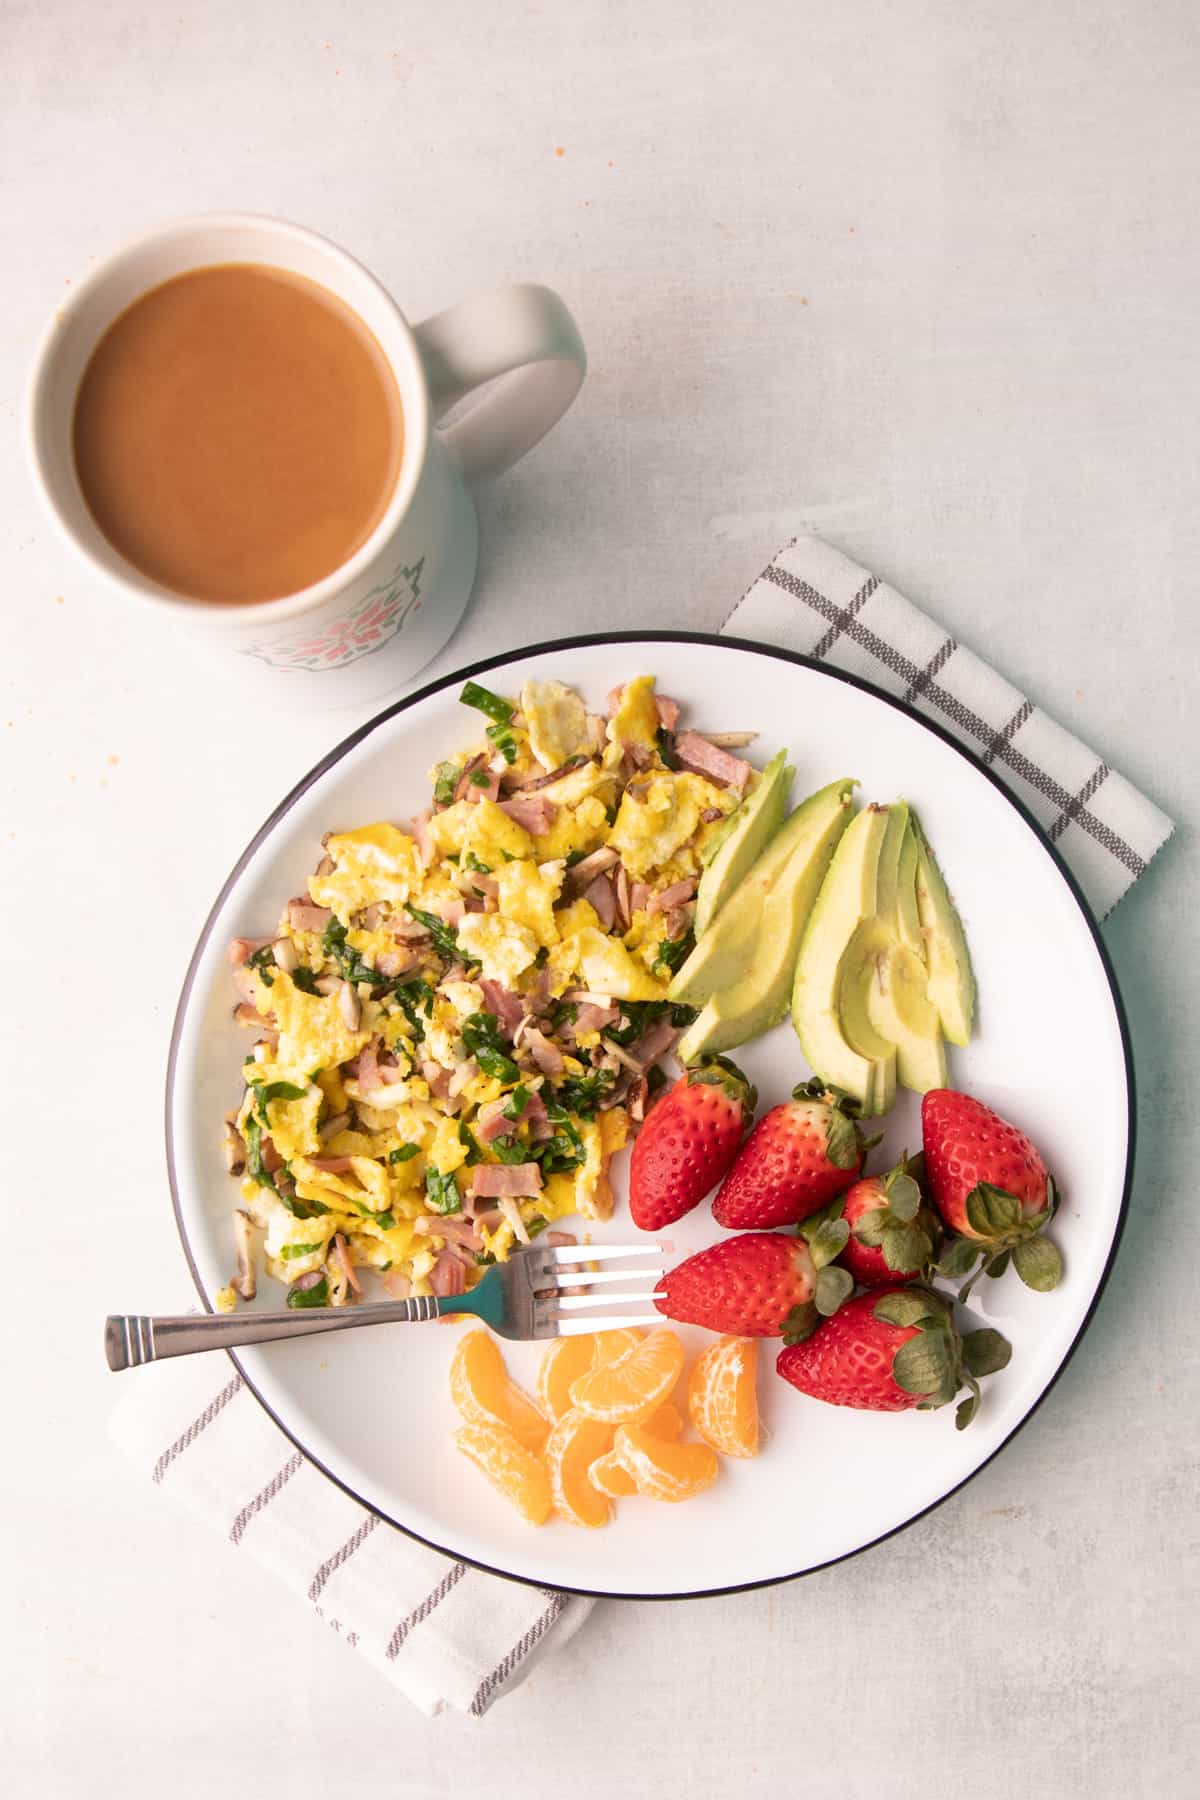 Breakfast on a white plate: egg scramble, fruit, and avocado. A mug sits next to the plate.